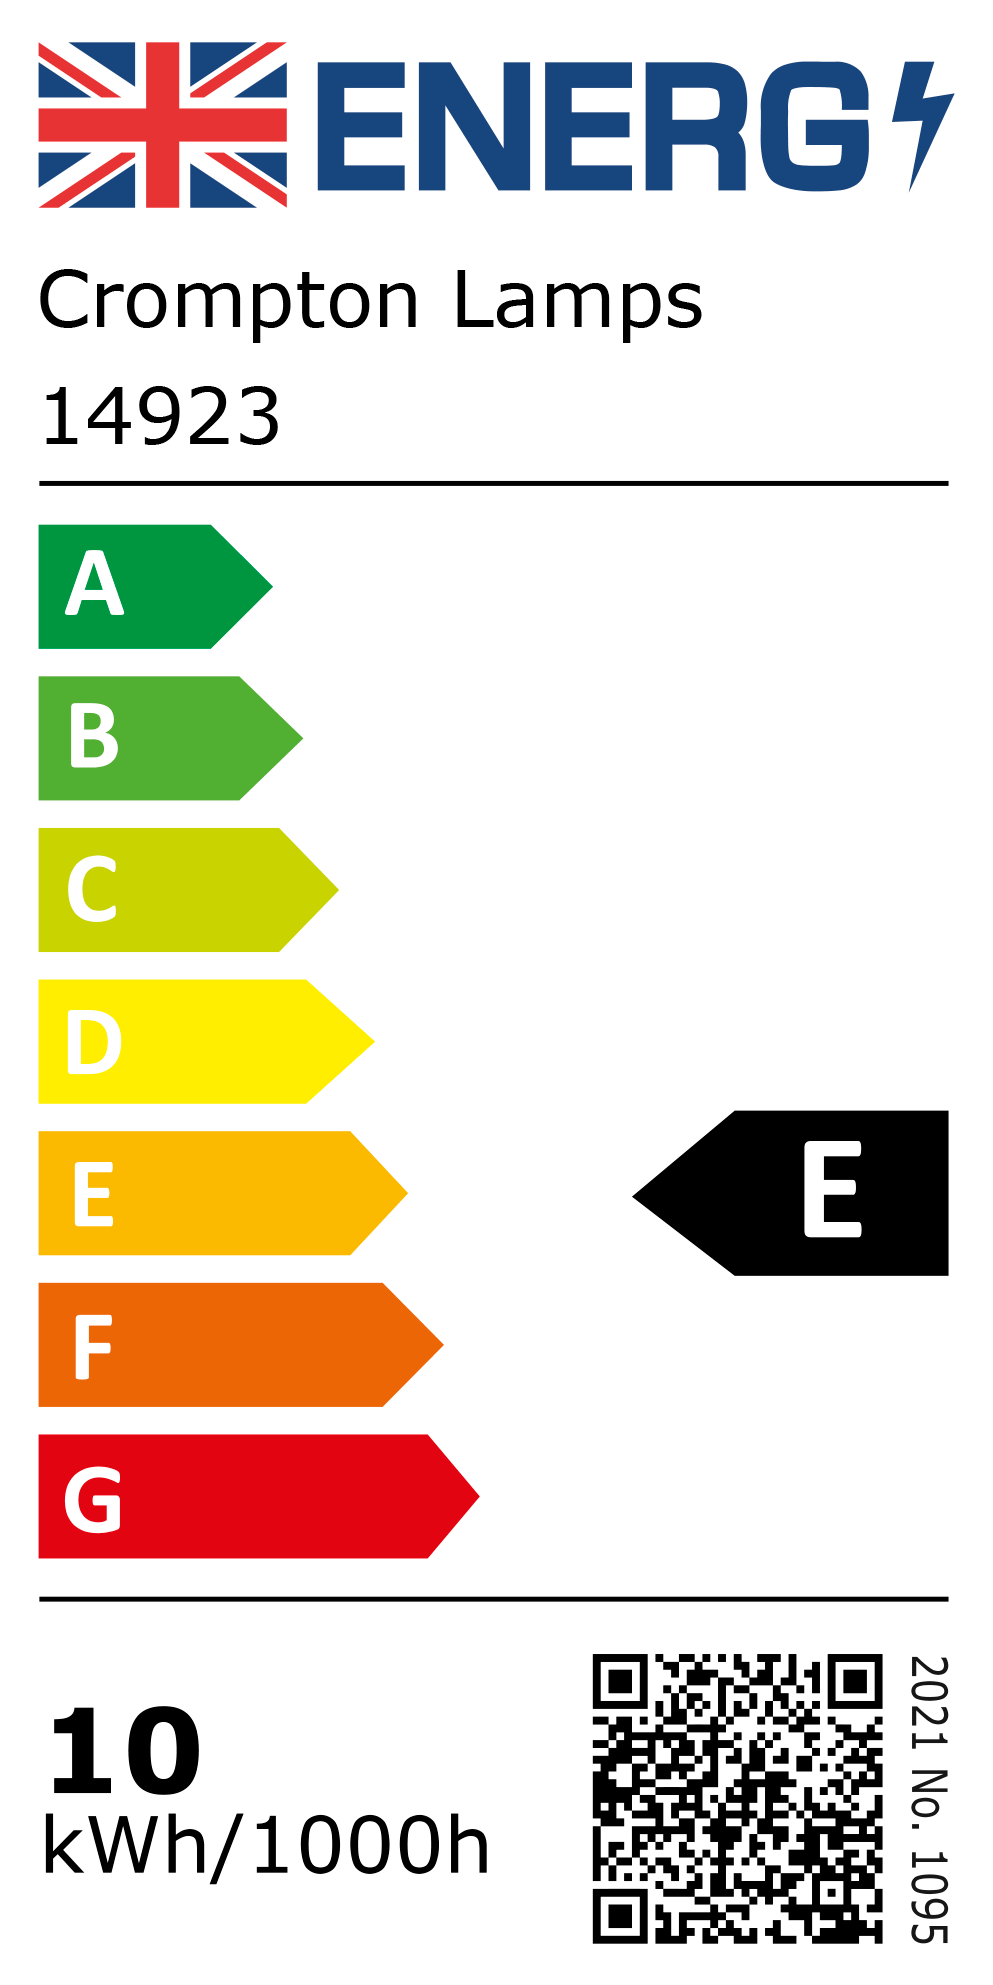 New 2021 Energy Rating Label: Stock Code 14923